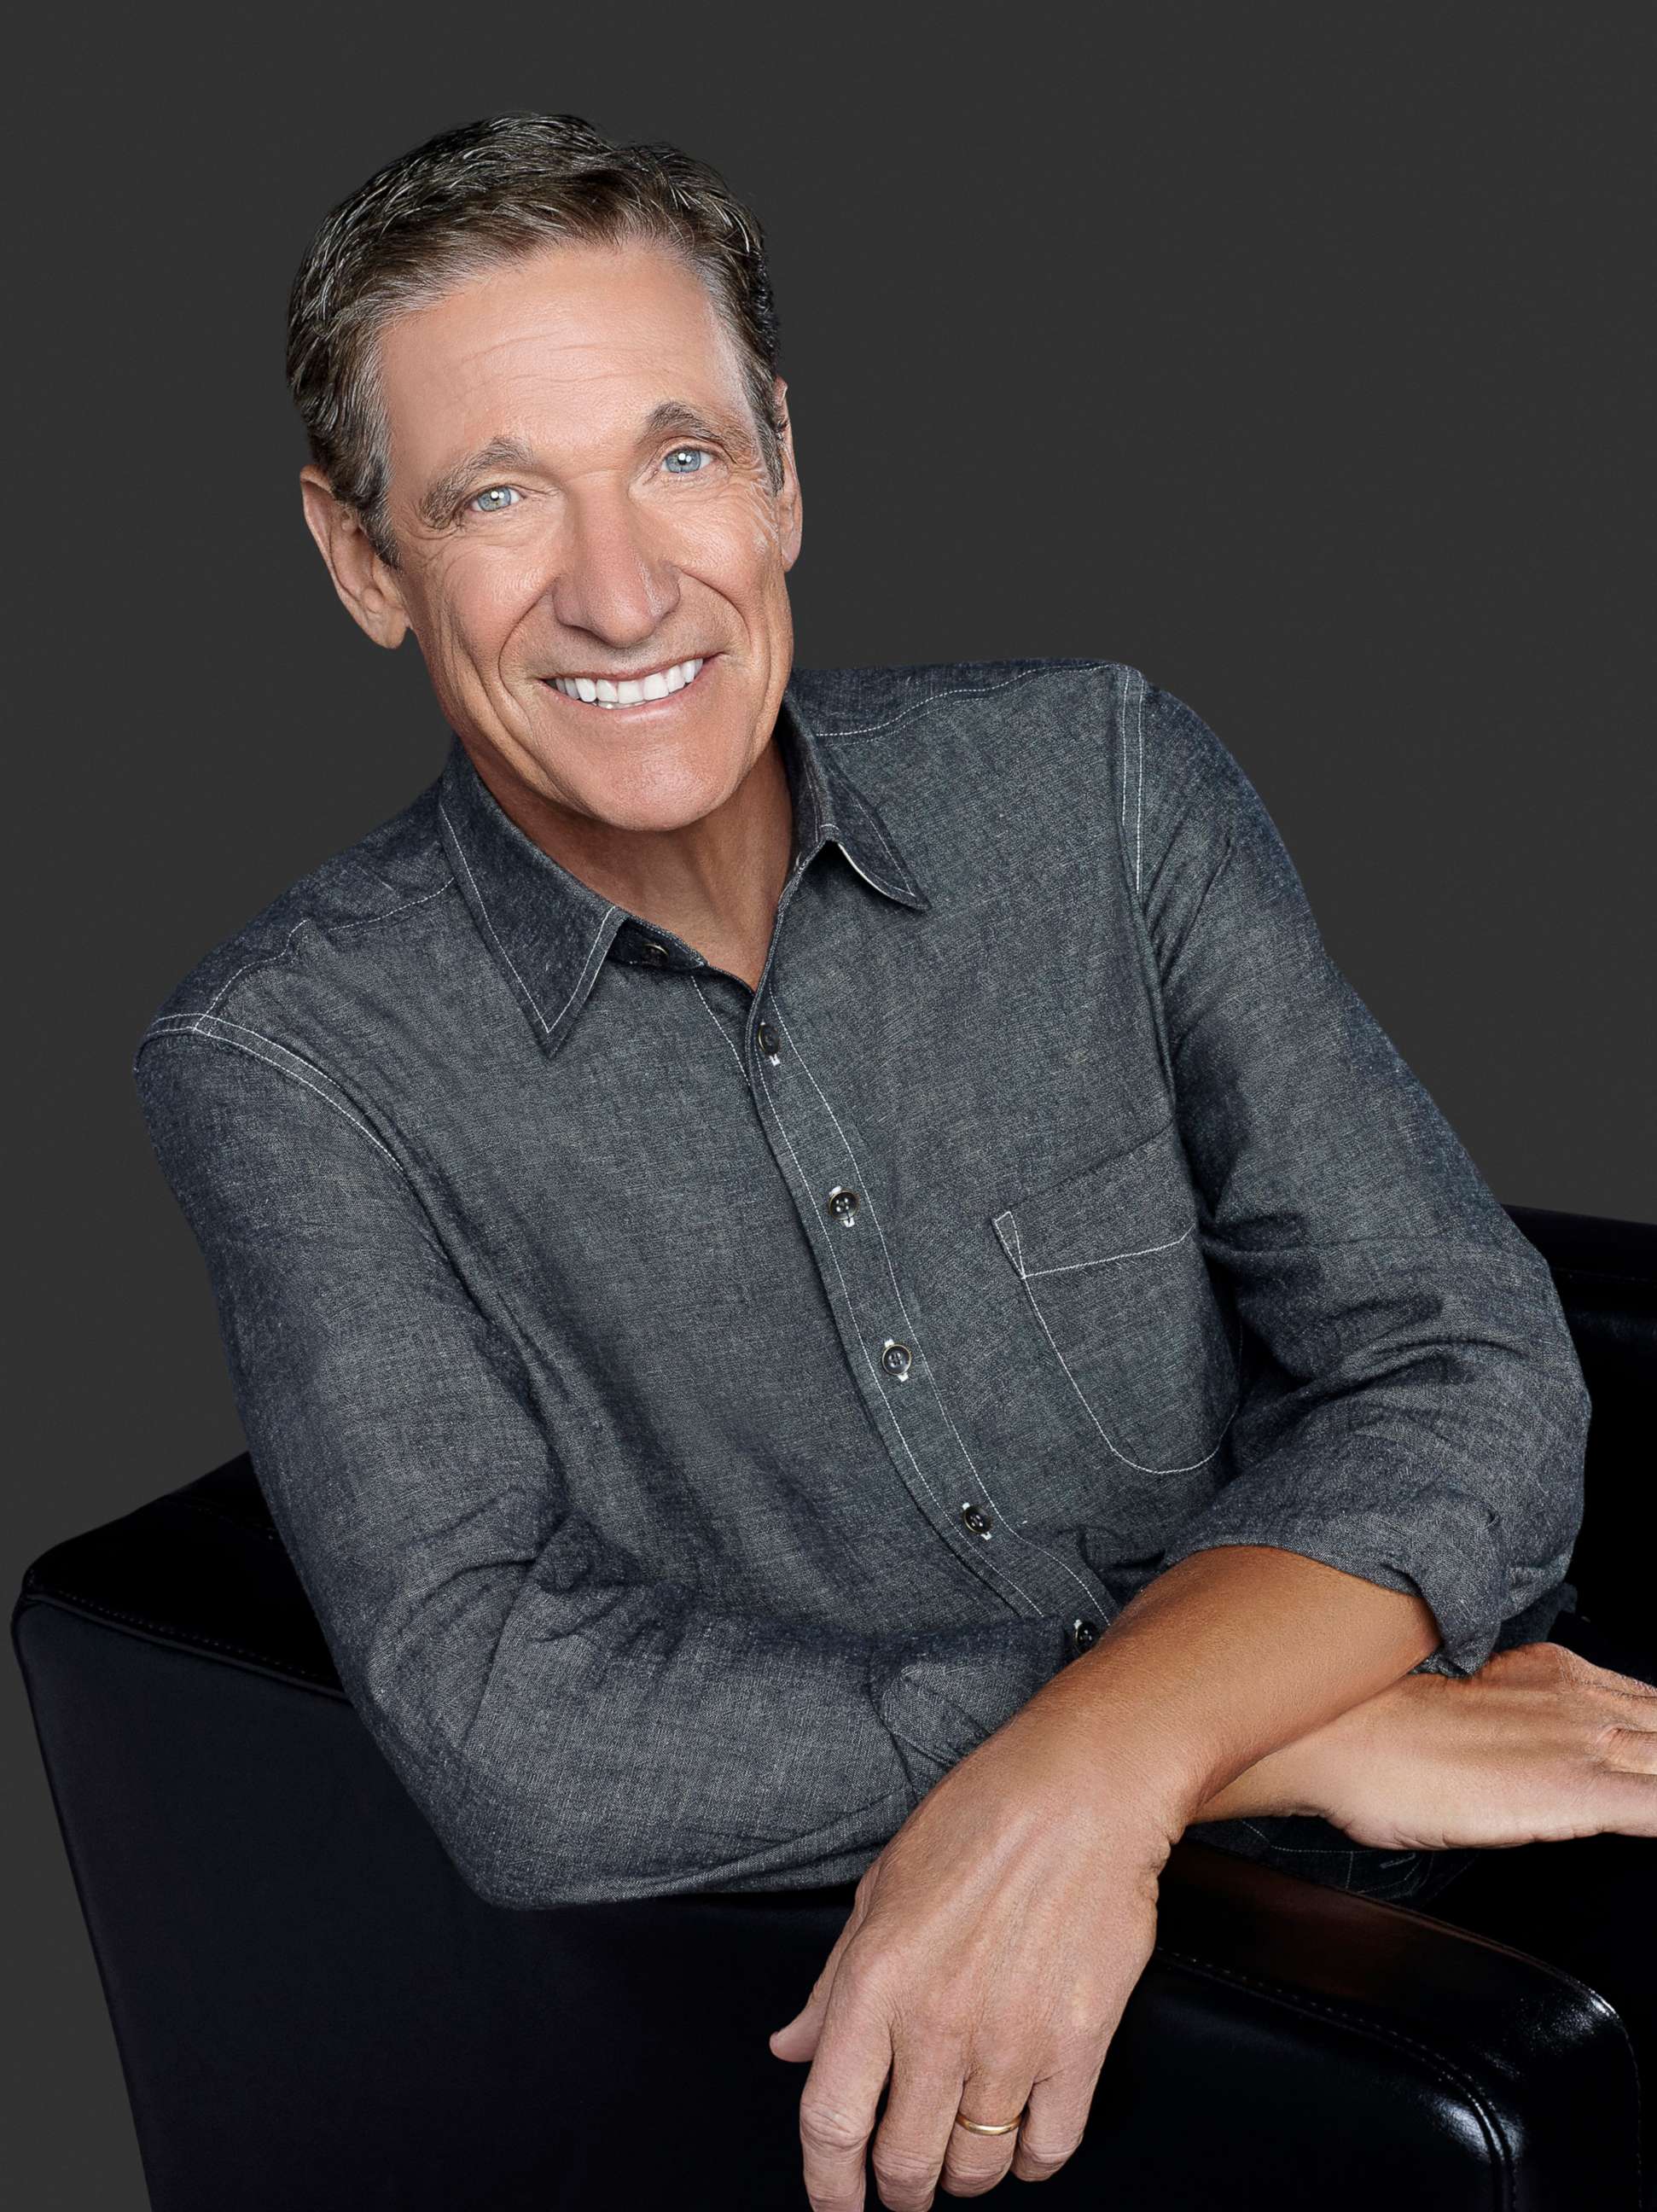 PHOTO: Maury Povich poses for a portrait for the 2013 Season of his talk show.